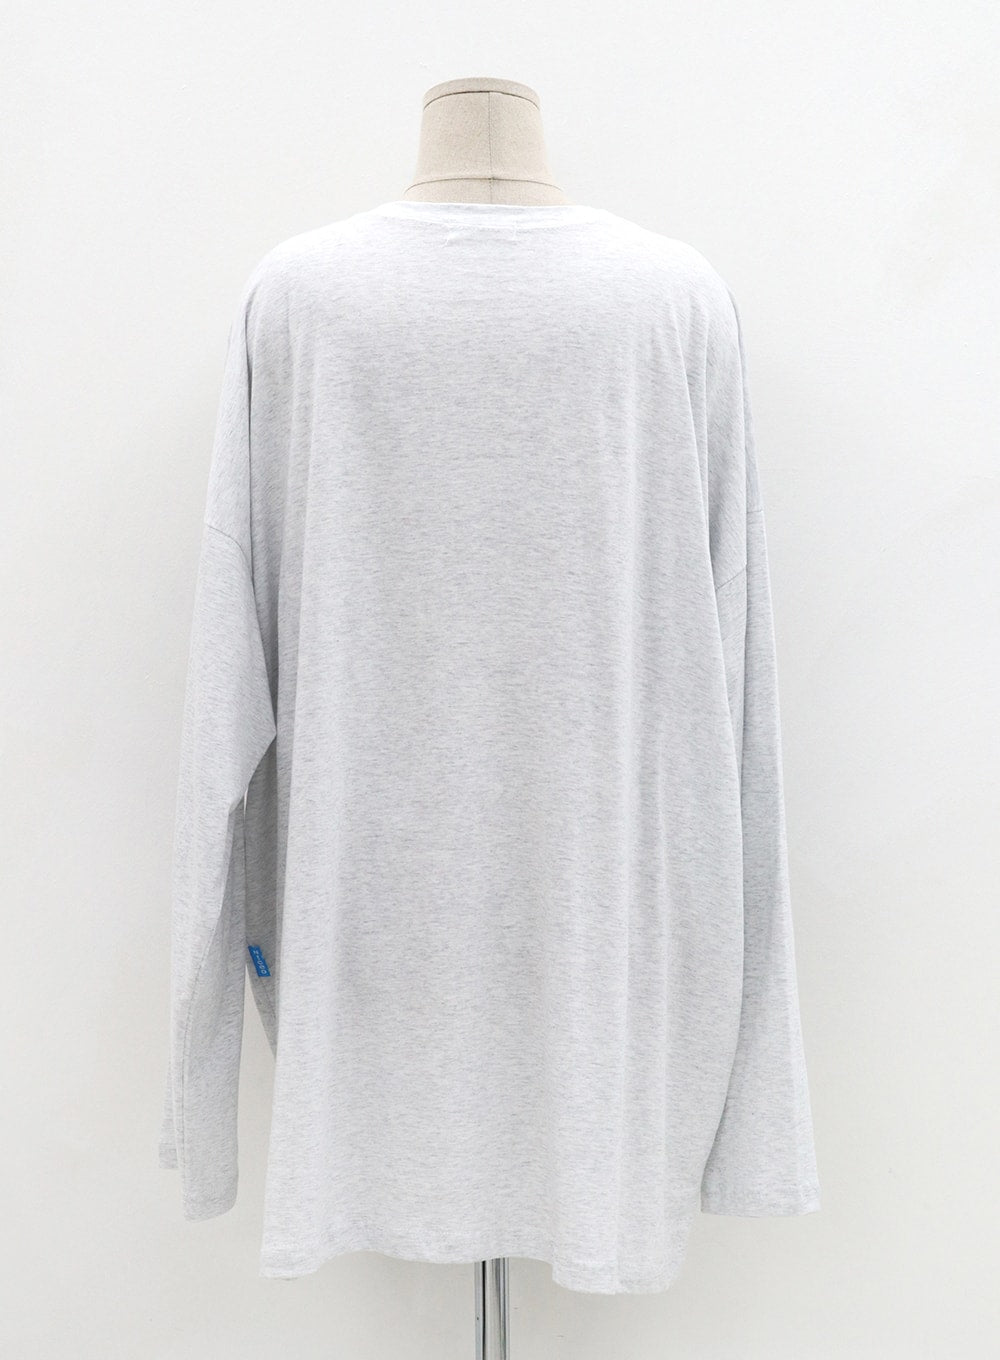 Plus Casual Round Cotton Long Sleeve T-Shirt IS02